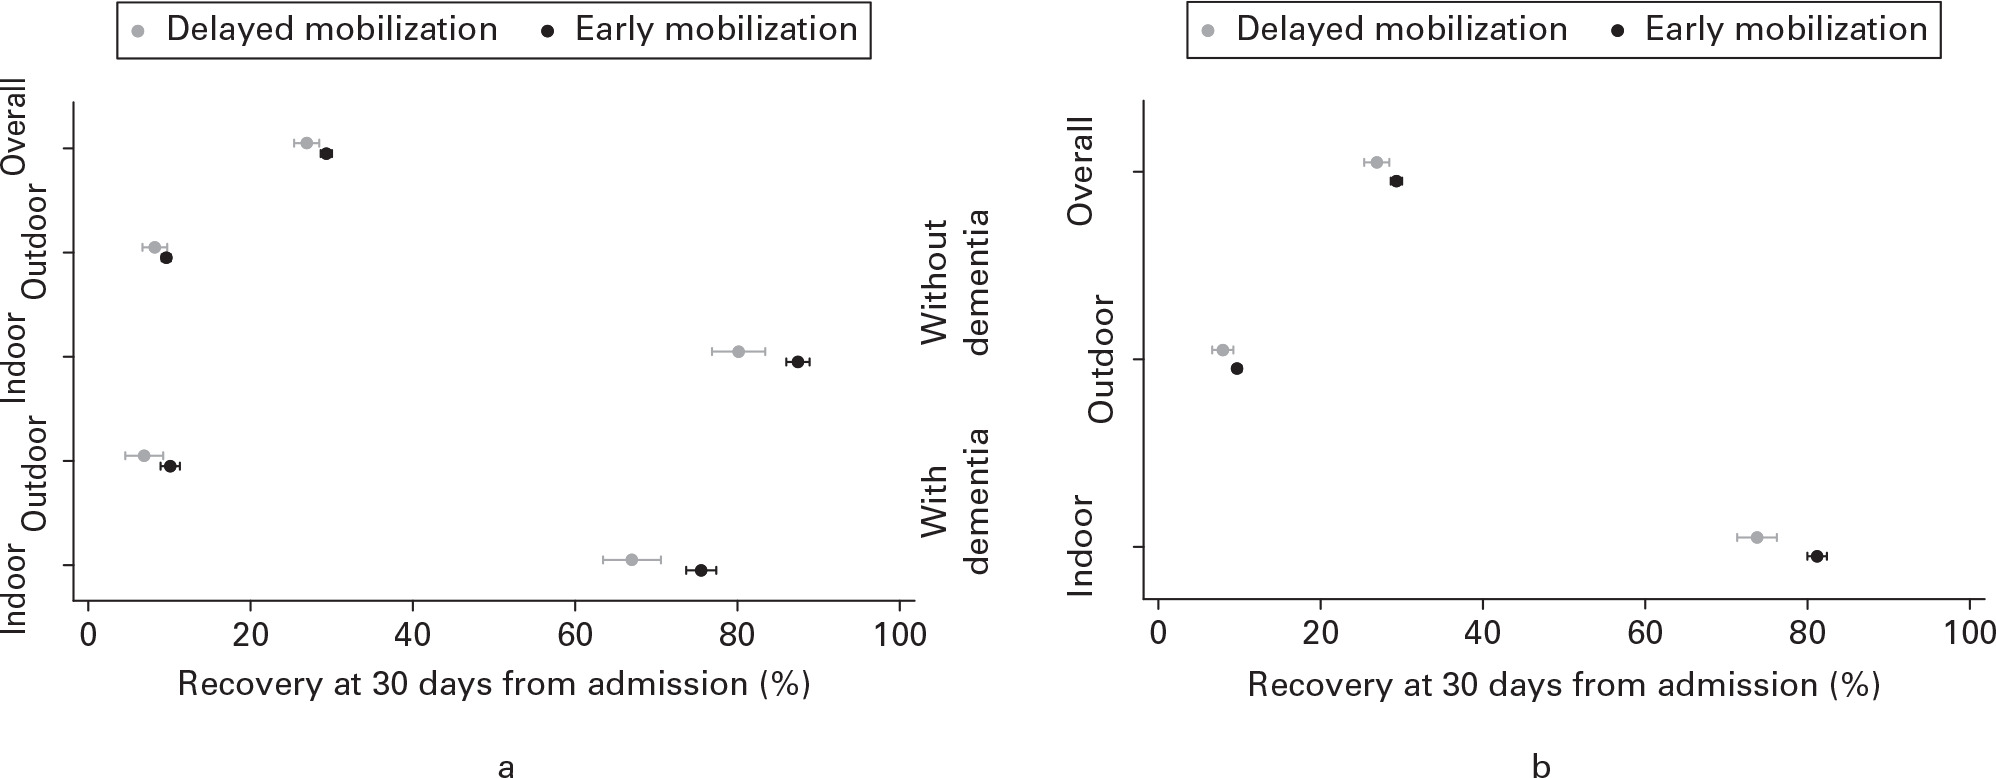 Fig. 2 
            a) Weighted probability of recovery at 30 days from admission in relation to timing of mobilization by ambulation pre-fracture. b) Weighted probability of recovery at 30 days from admission in relation to timing of mobilization by ambulation pre-fracture and dementia.
          